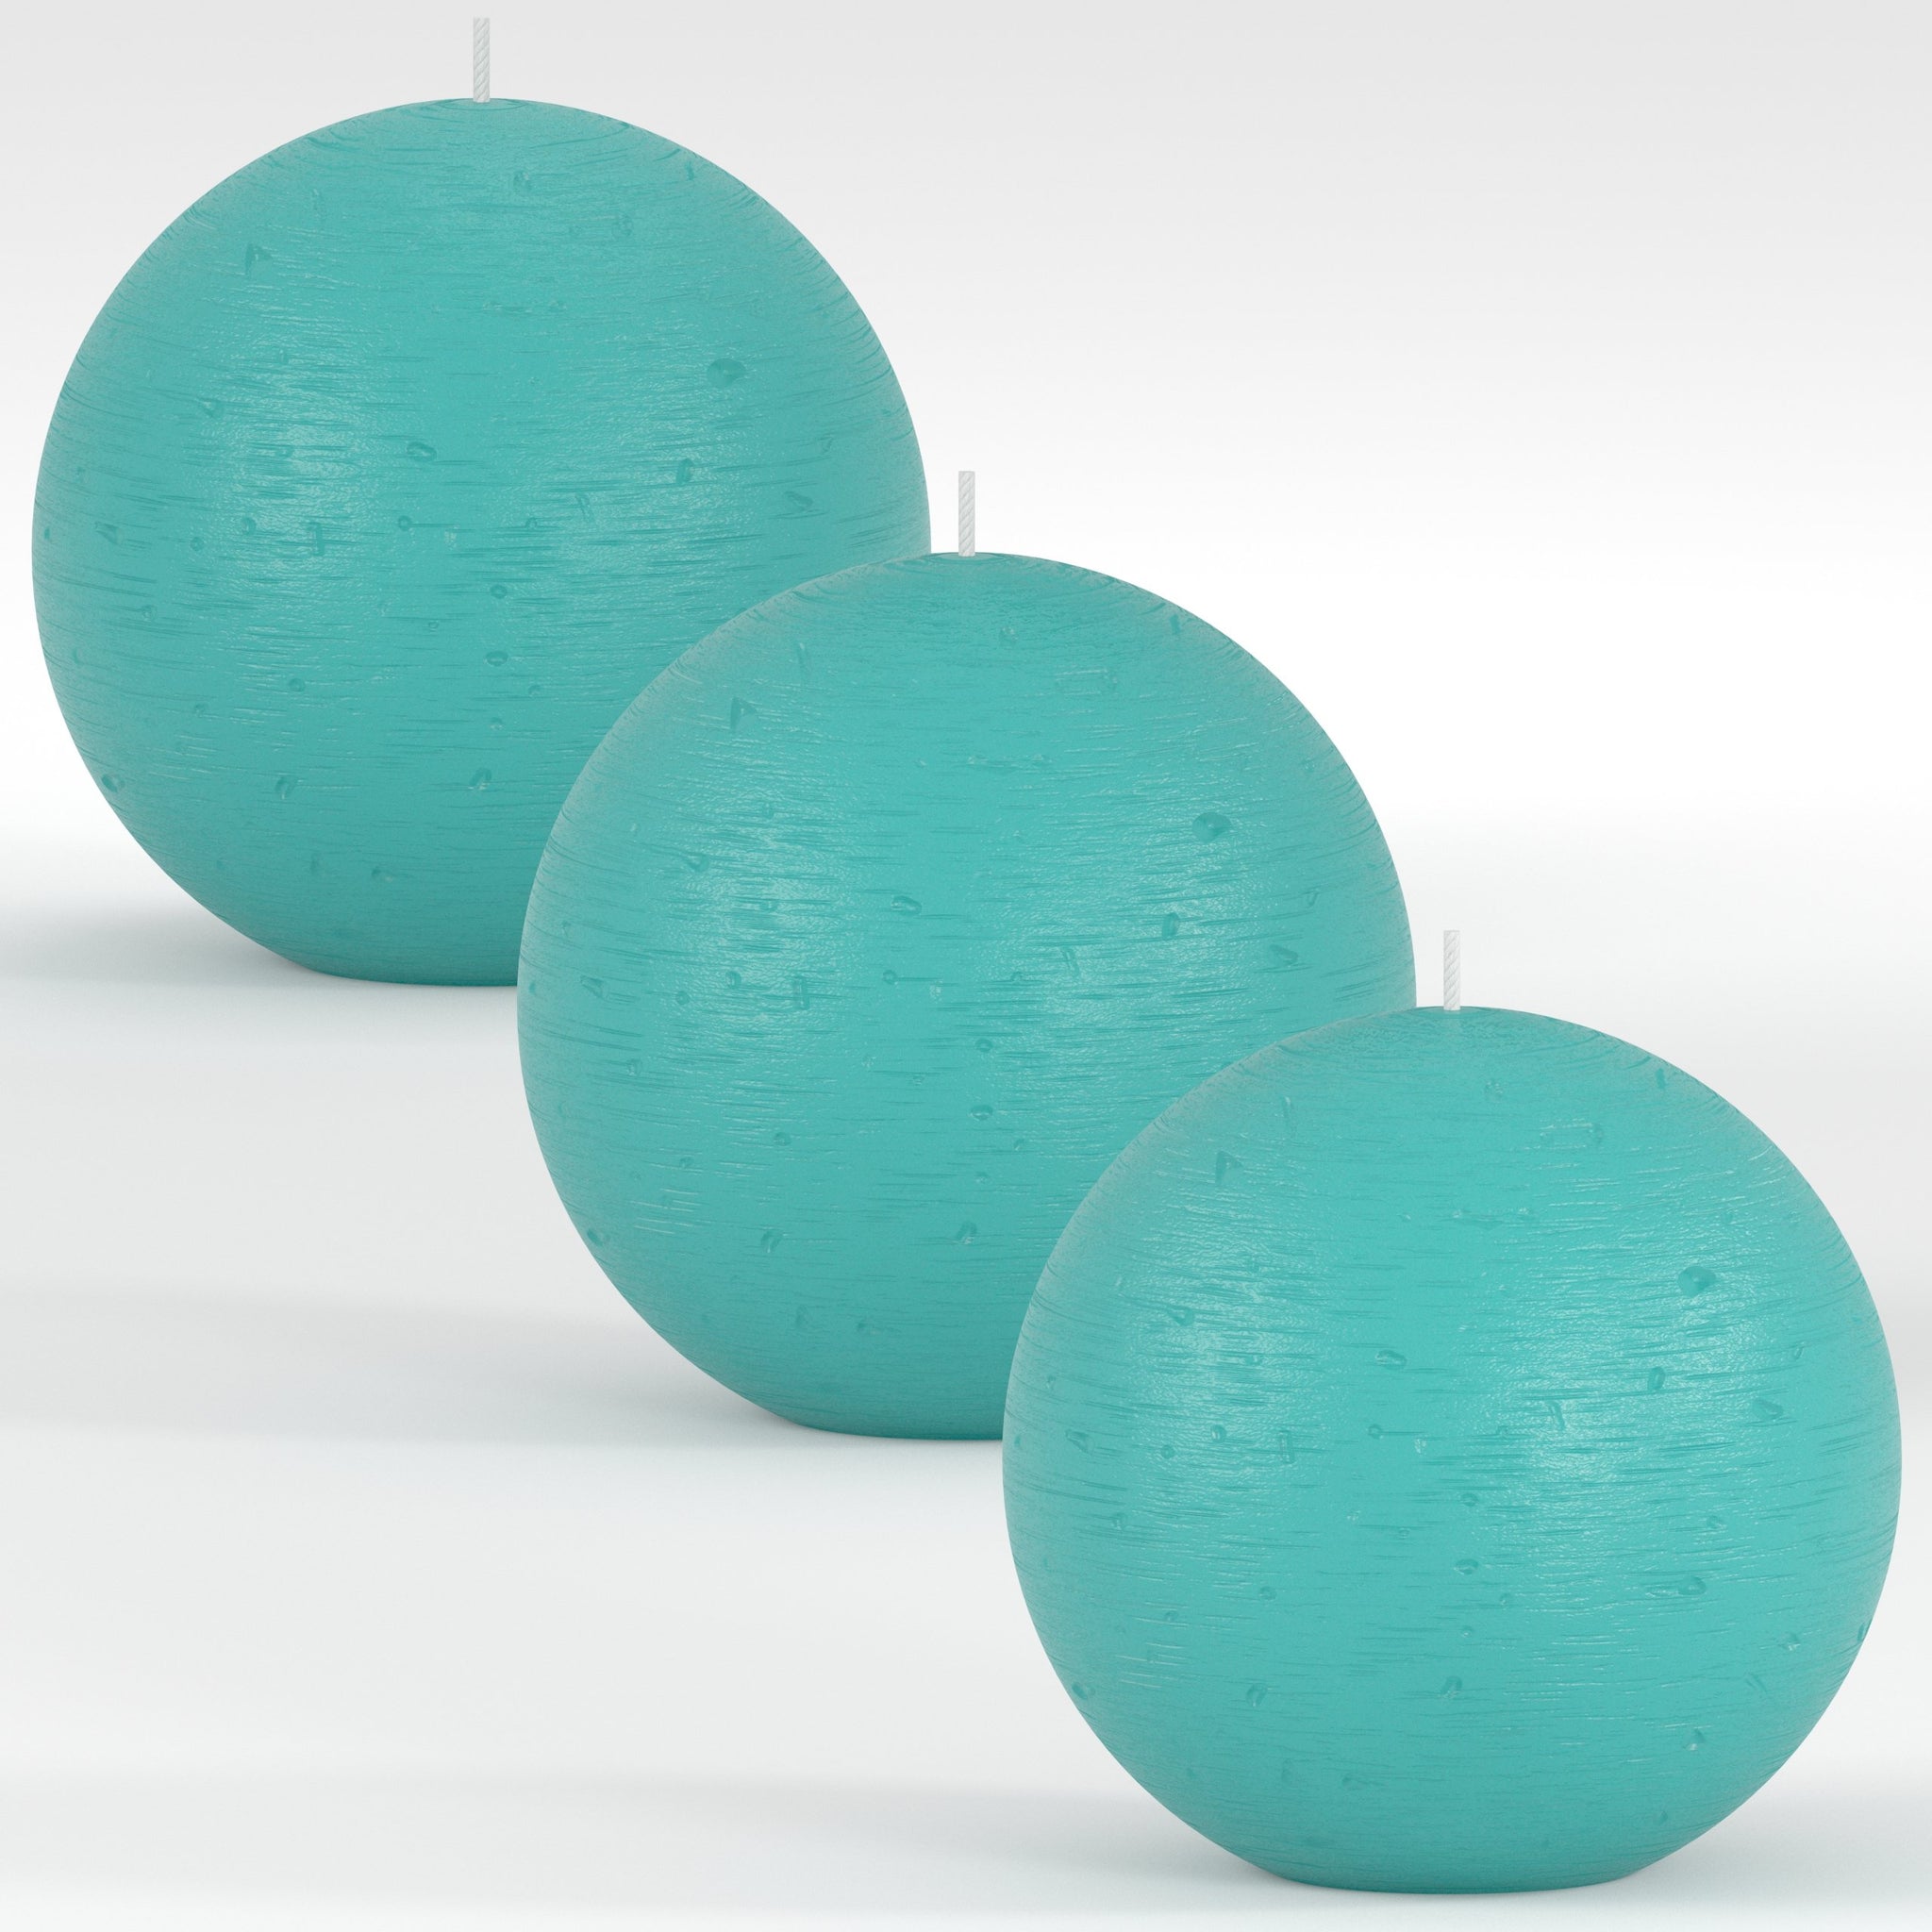 CANDWAX Turquoise Round Candles 3" - Set of 3 pcs